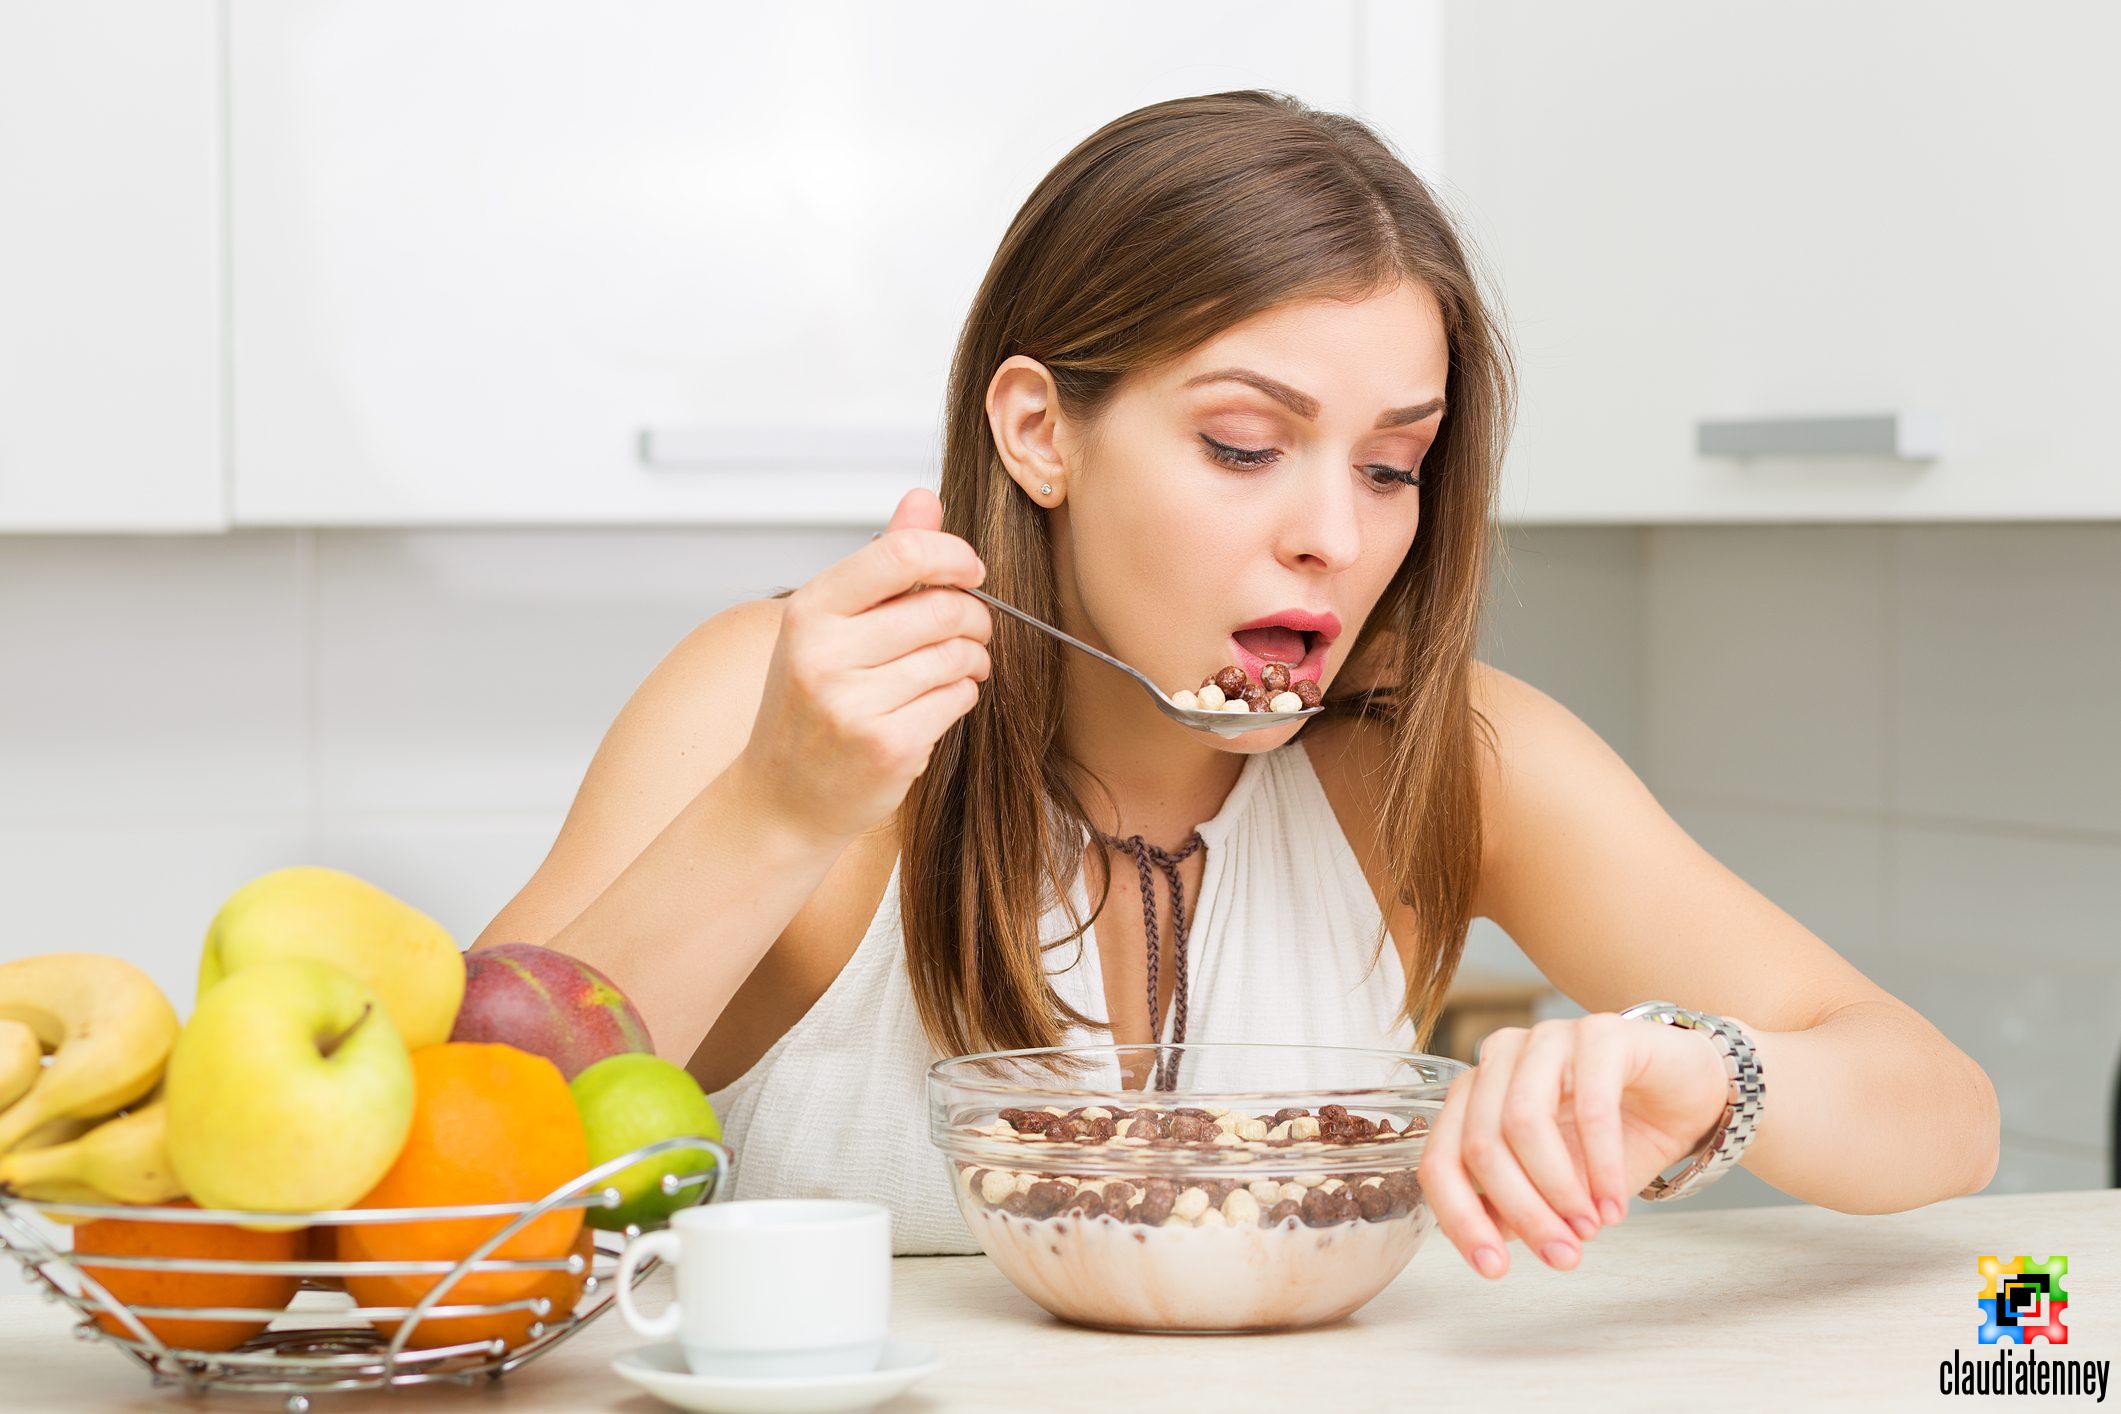 Top 5 Foods You Can Eat Without Chewing